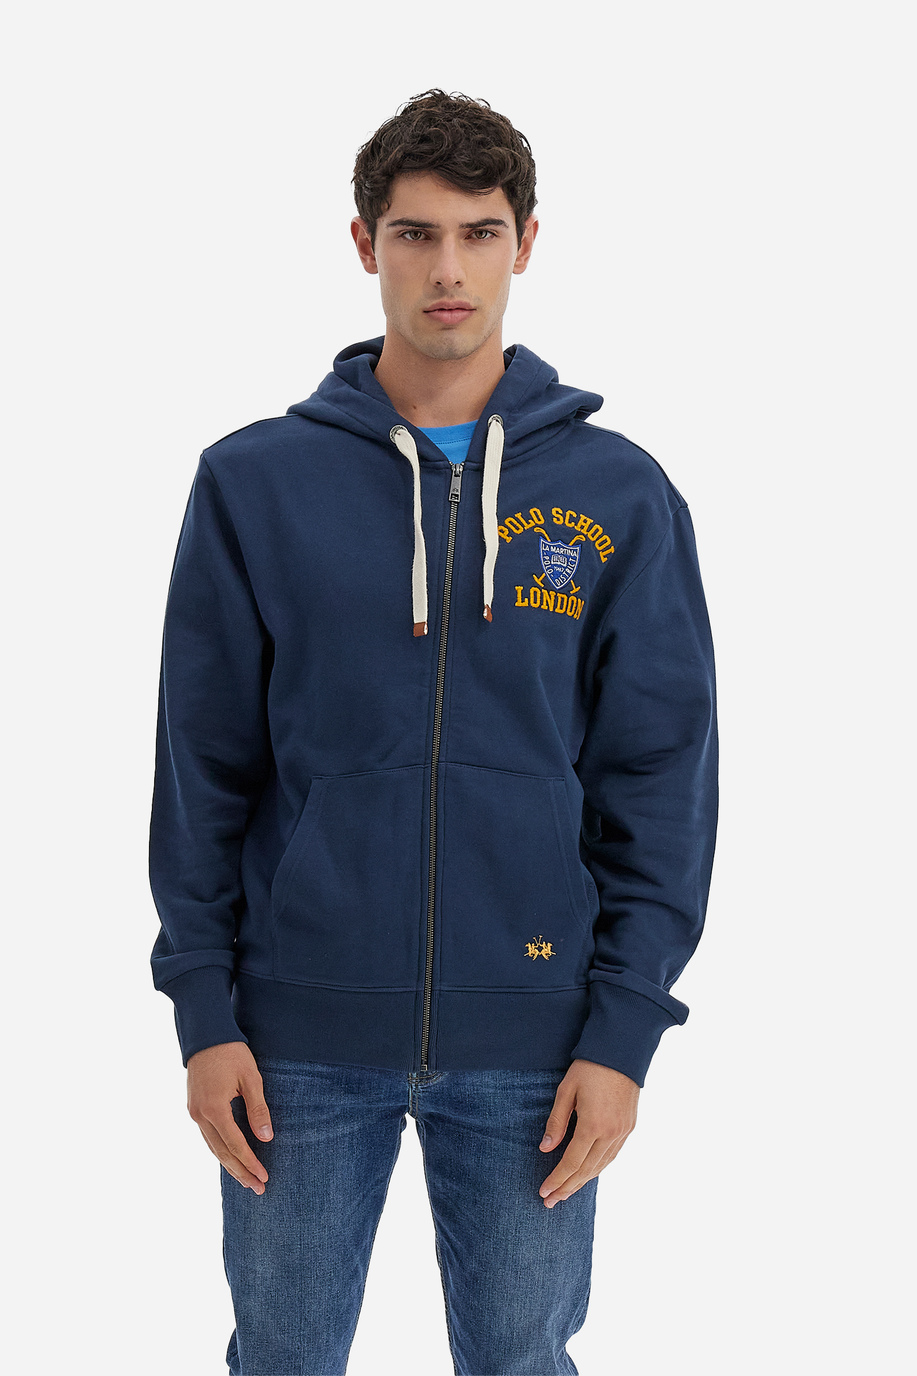 Polo Academy men's full zip hooded sweatshirt in solid color with small logo - Valoris - Polo Academy | La Martina - Official Online Shop